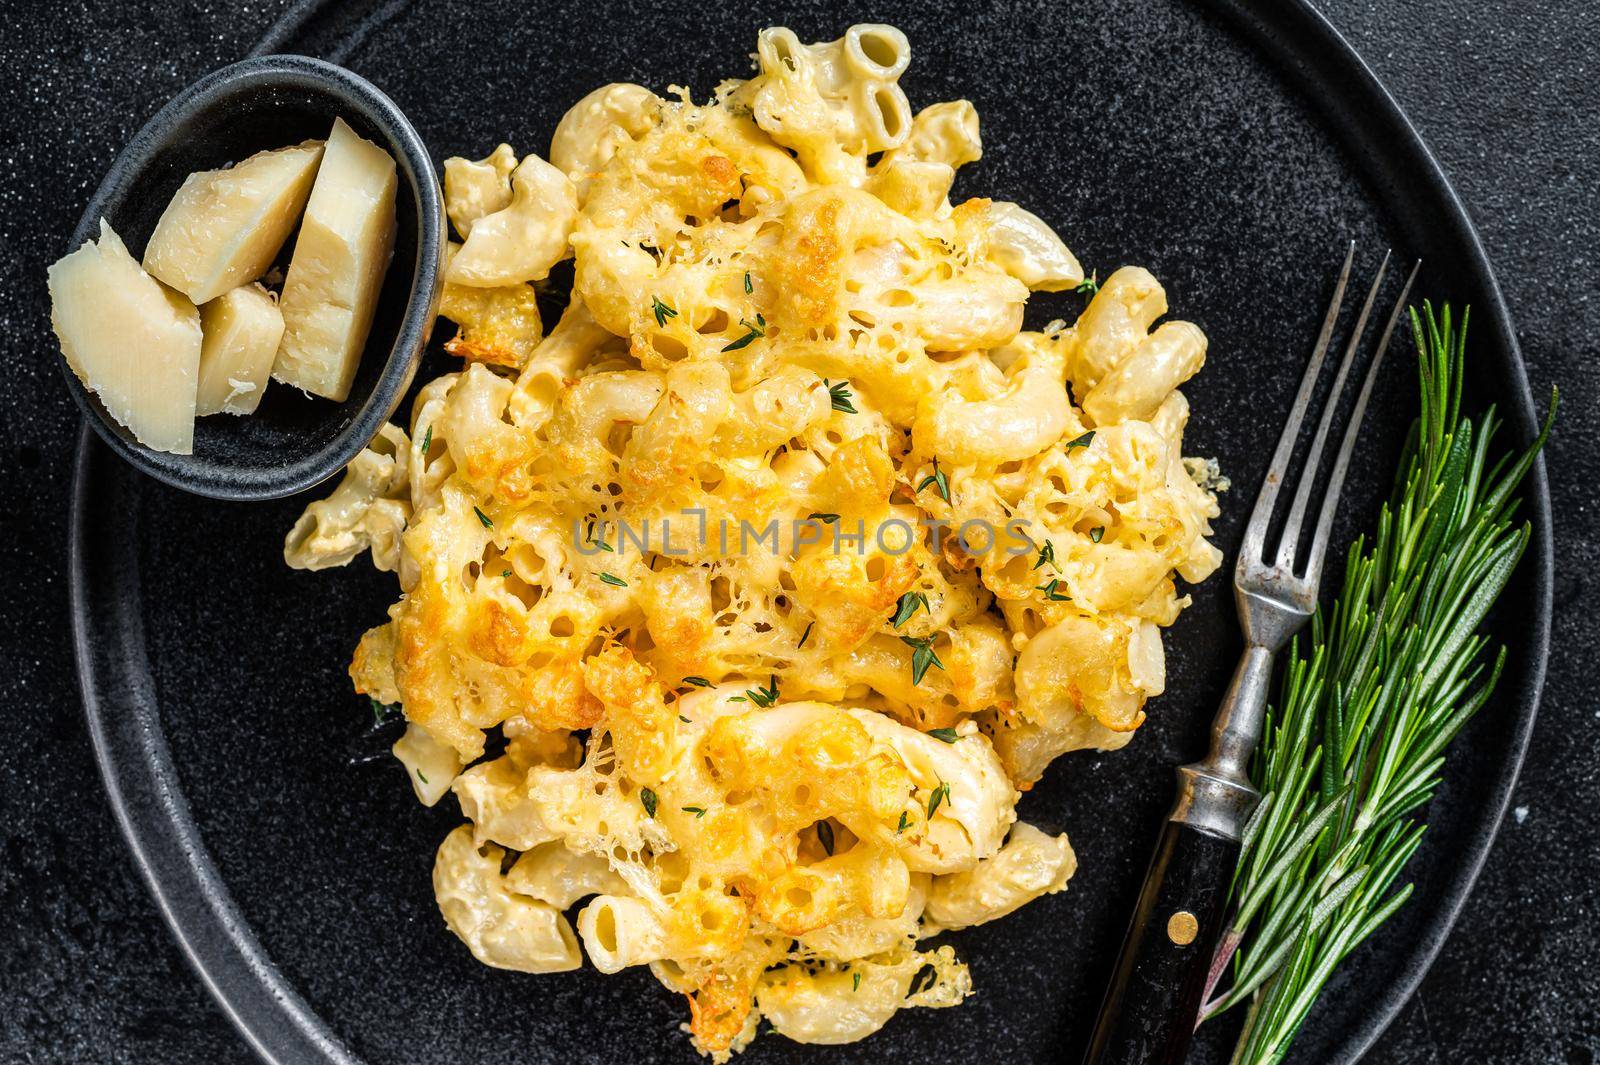 Baked Macaroni Mac and cheese American dish with Cheddar cheese sauce. Black background. Top view by Composter